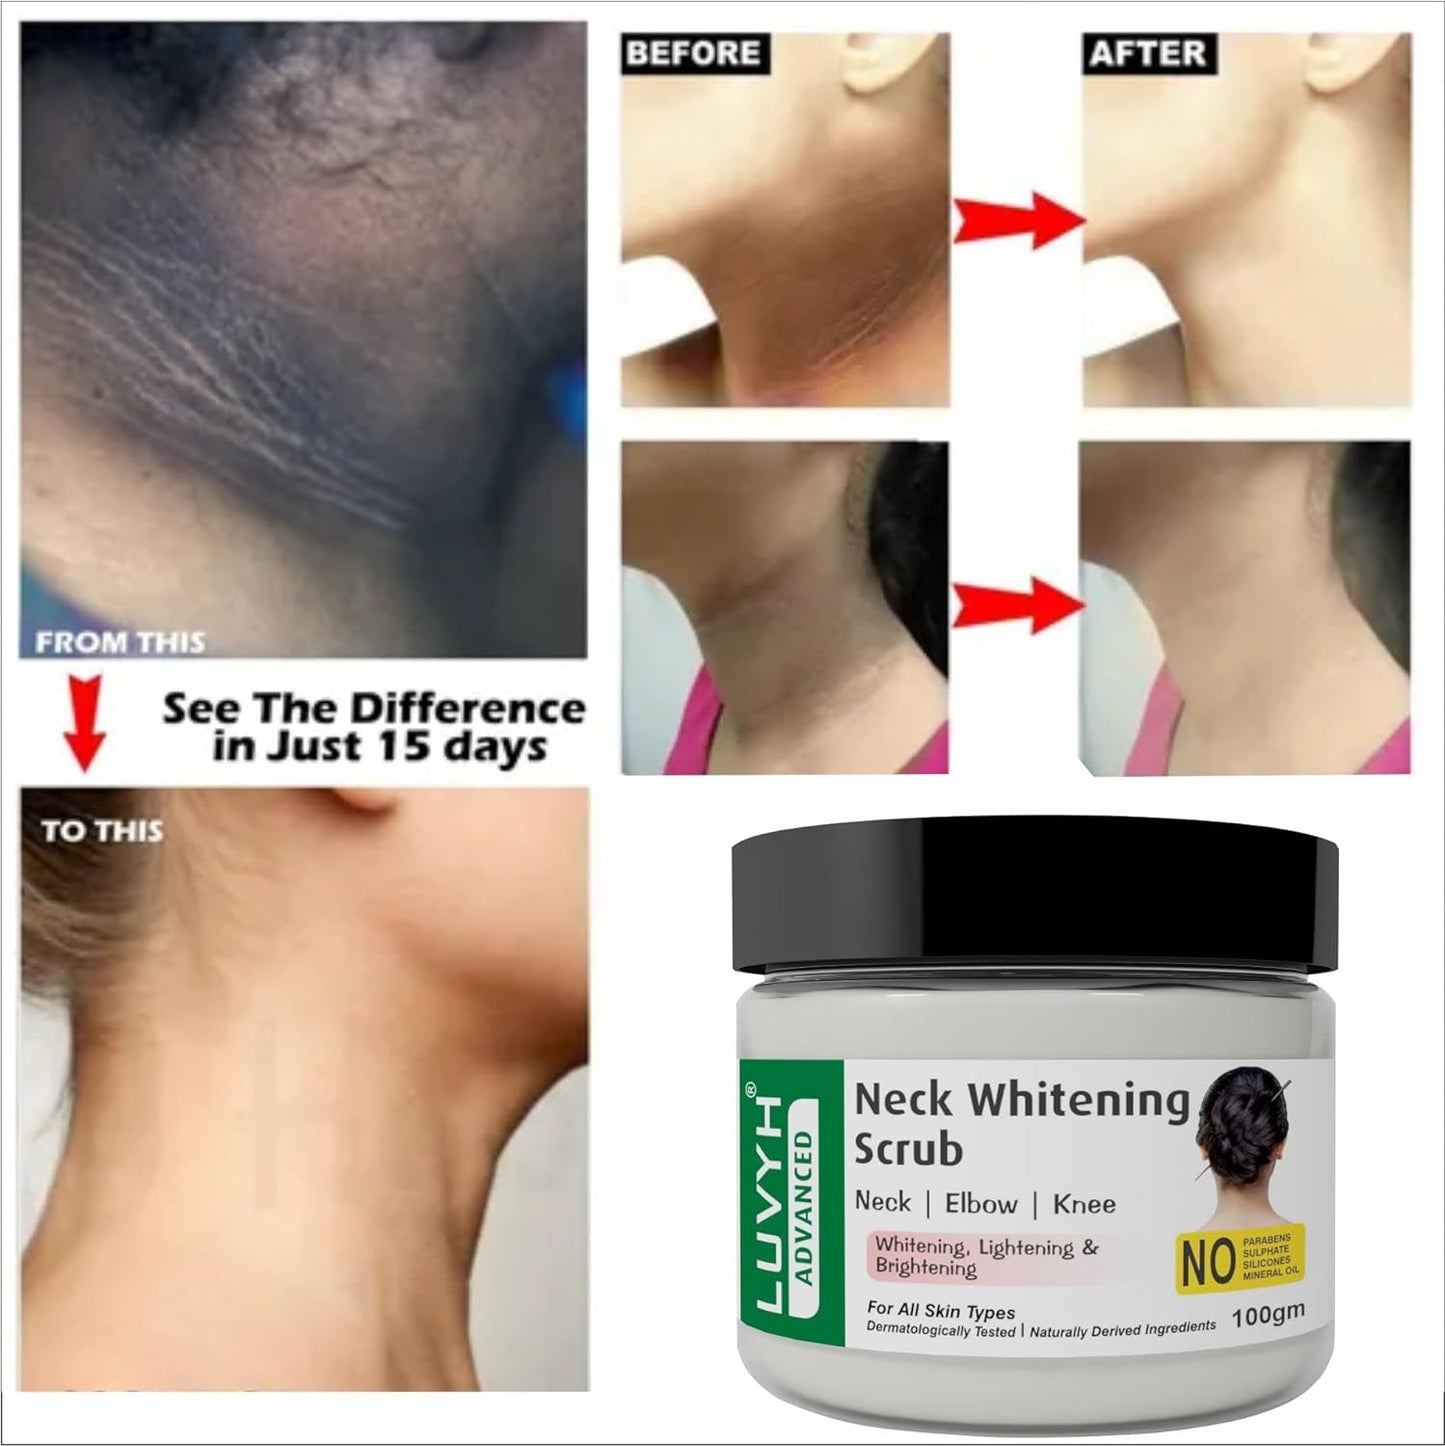 Before & After use results of Neck Whitening Scrub  